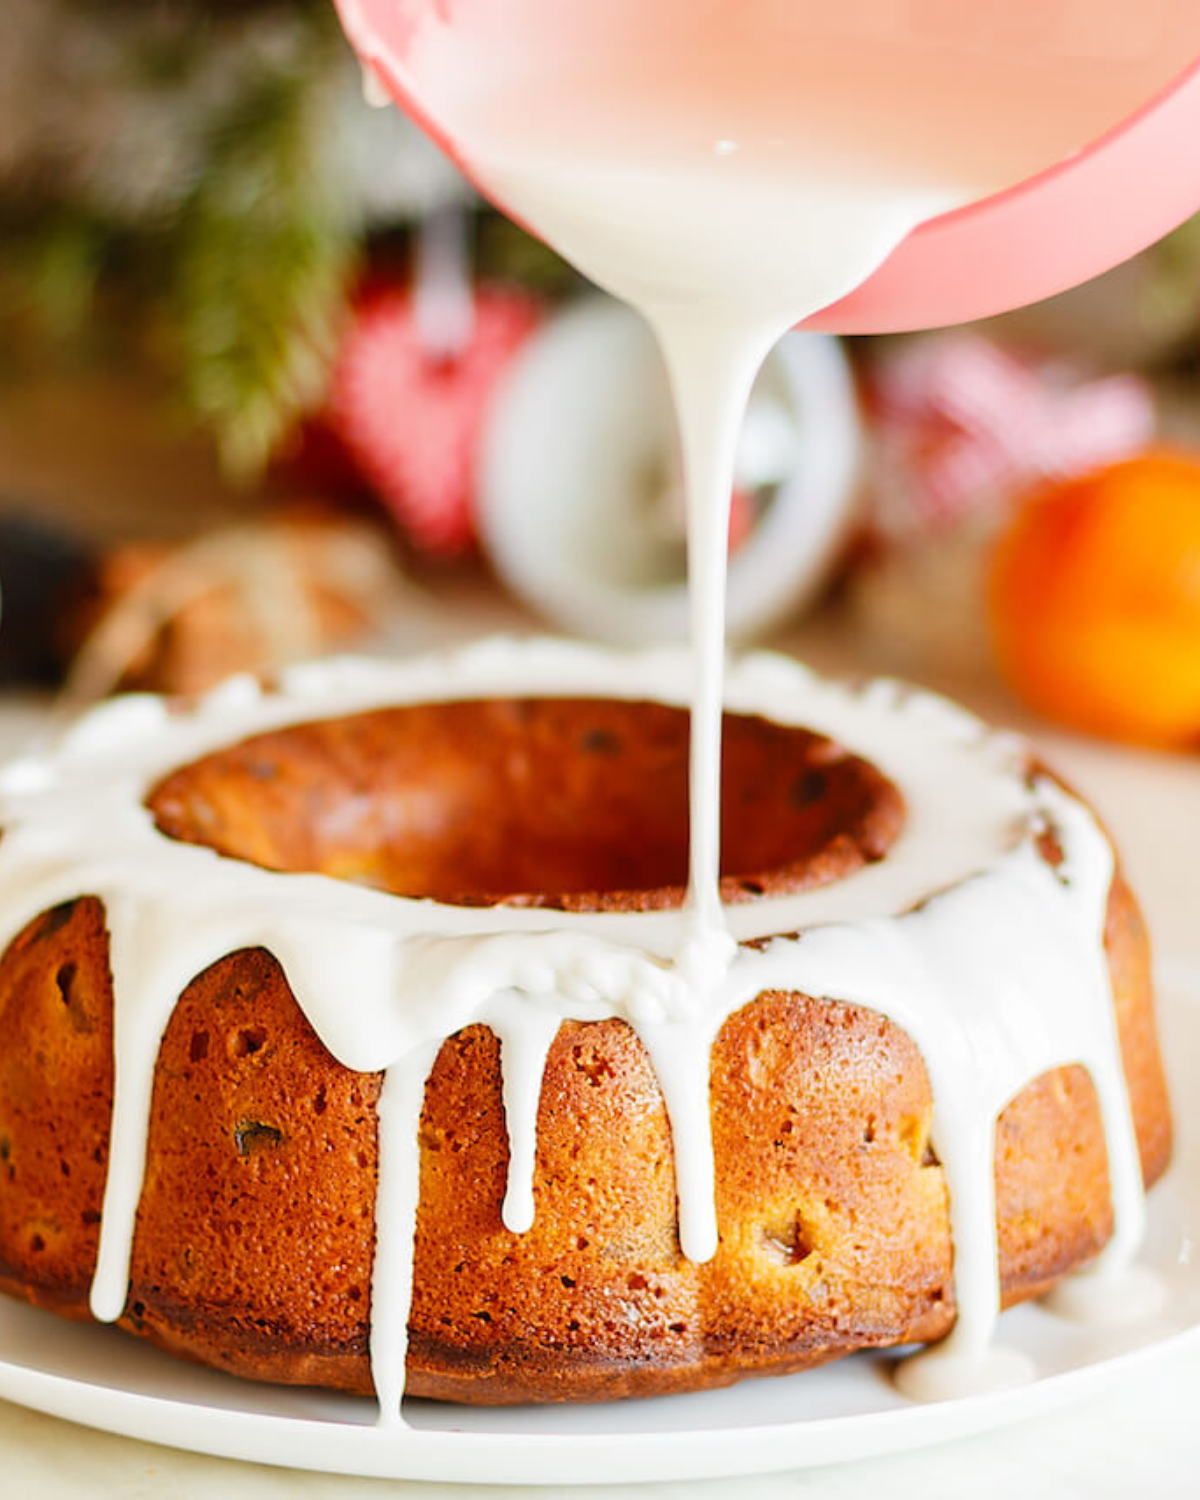 Drizzling the icing on top of the cinnamon bundt cake.